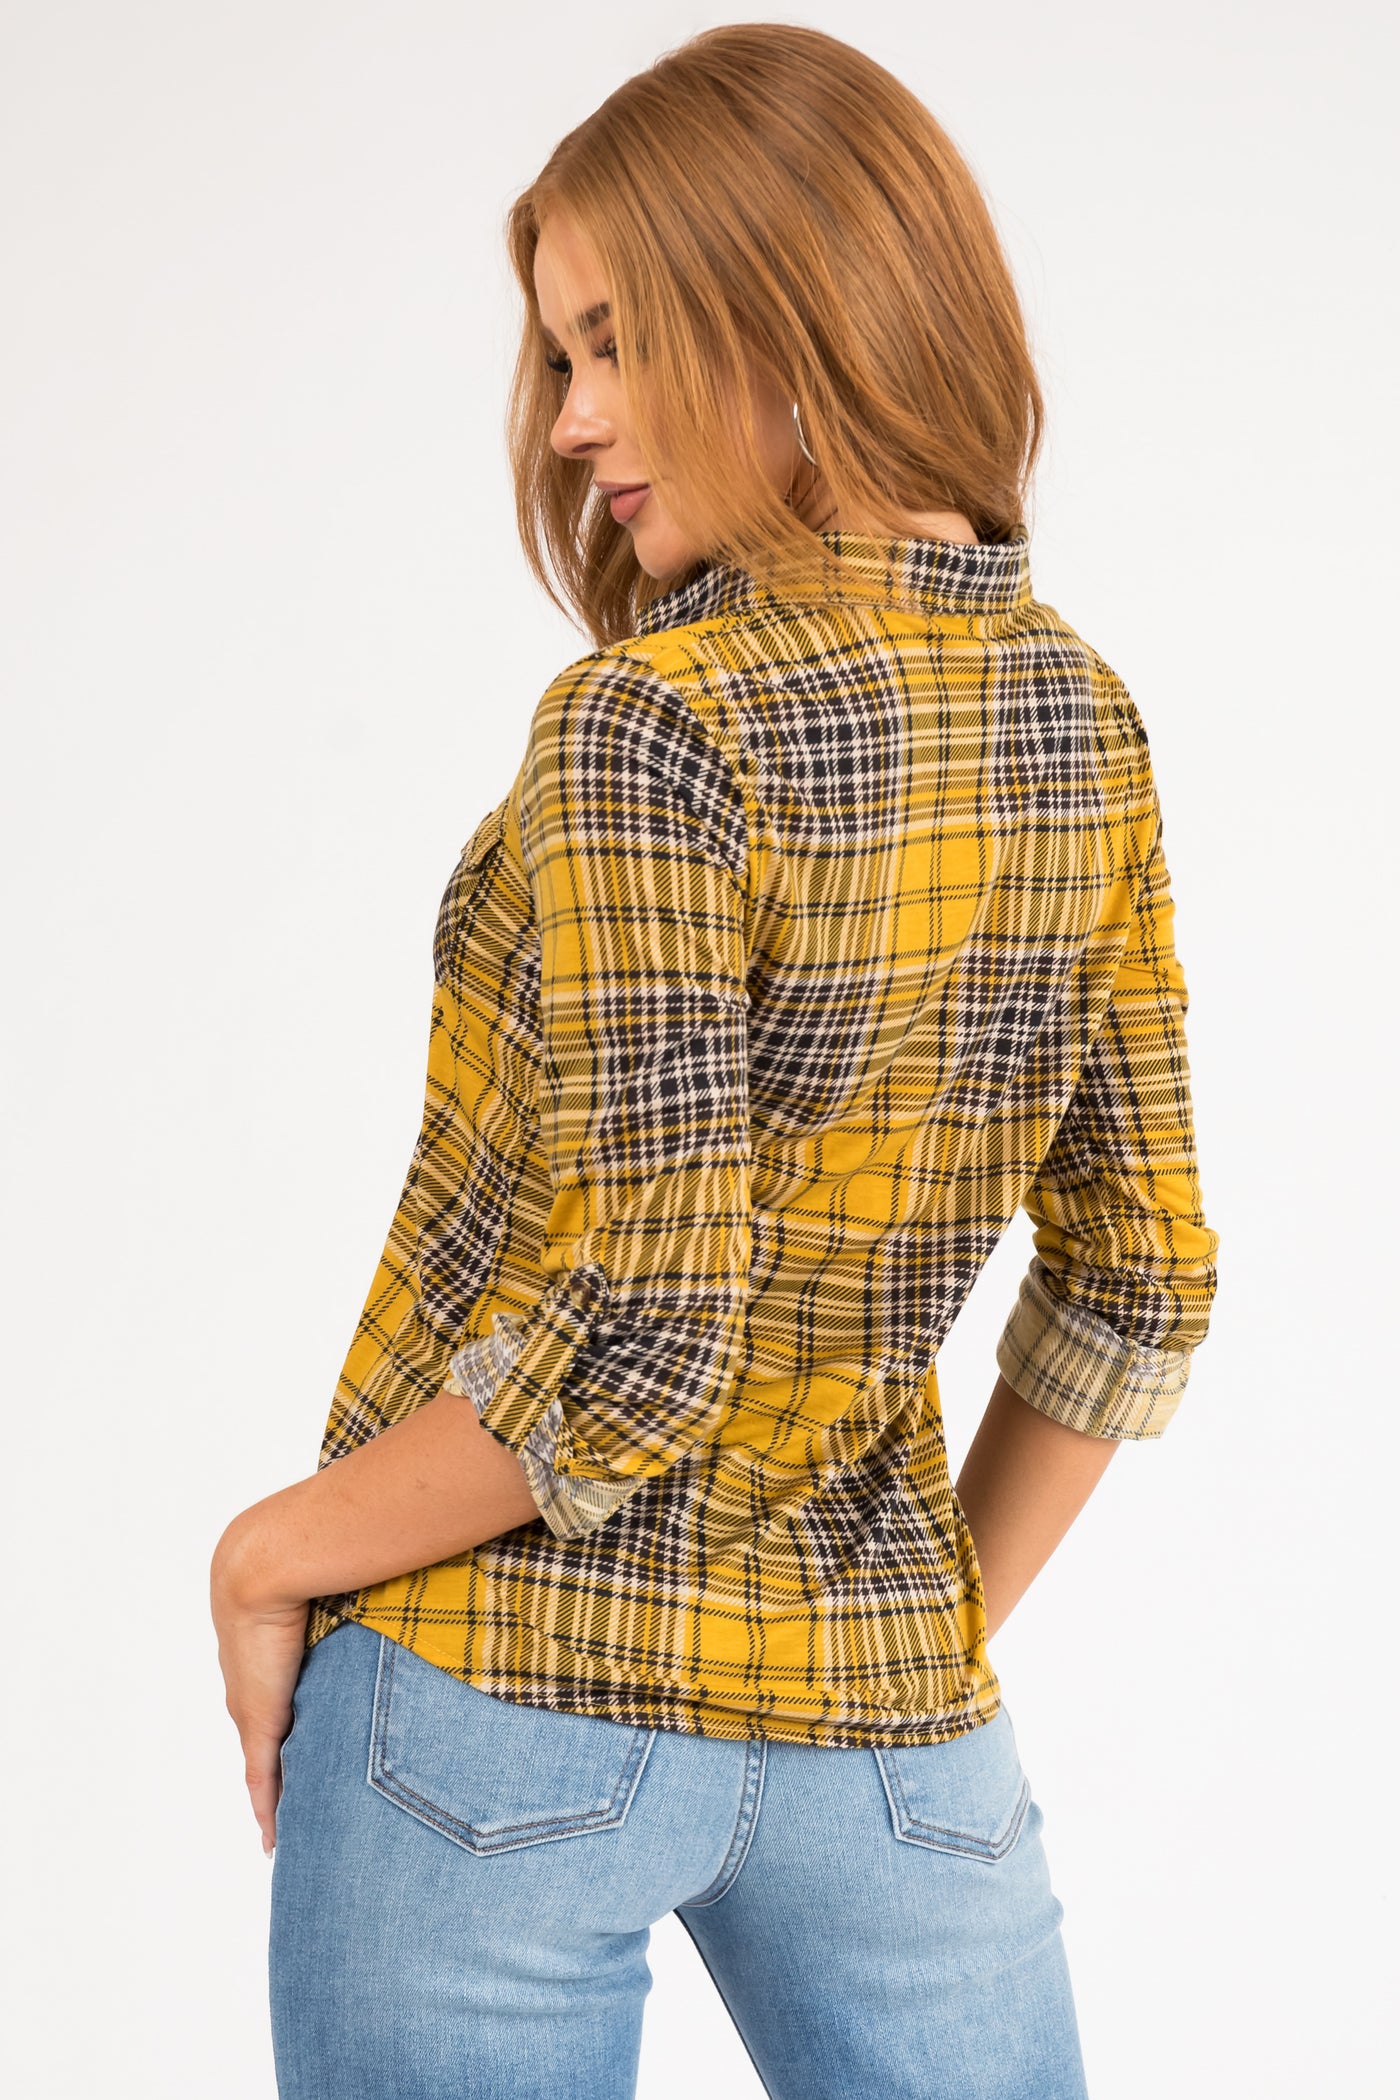 Mustard and Black Plaid Top with Chest Pocket